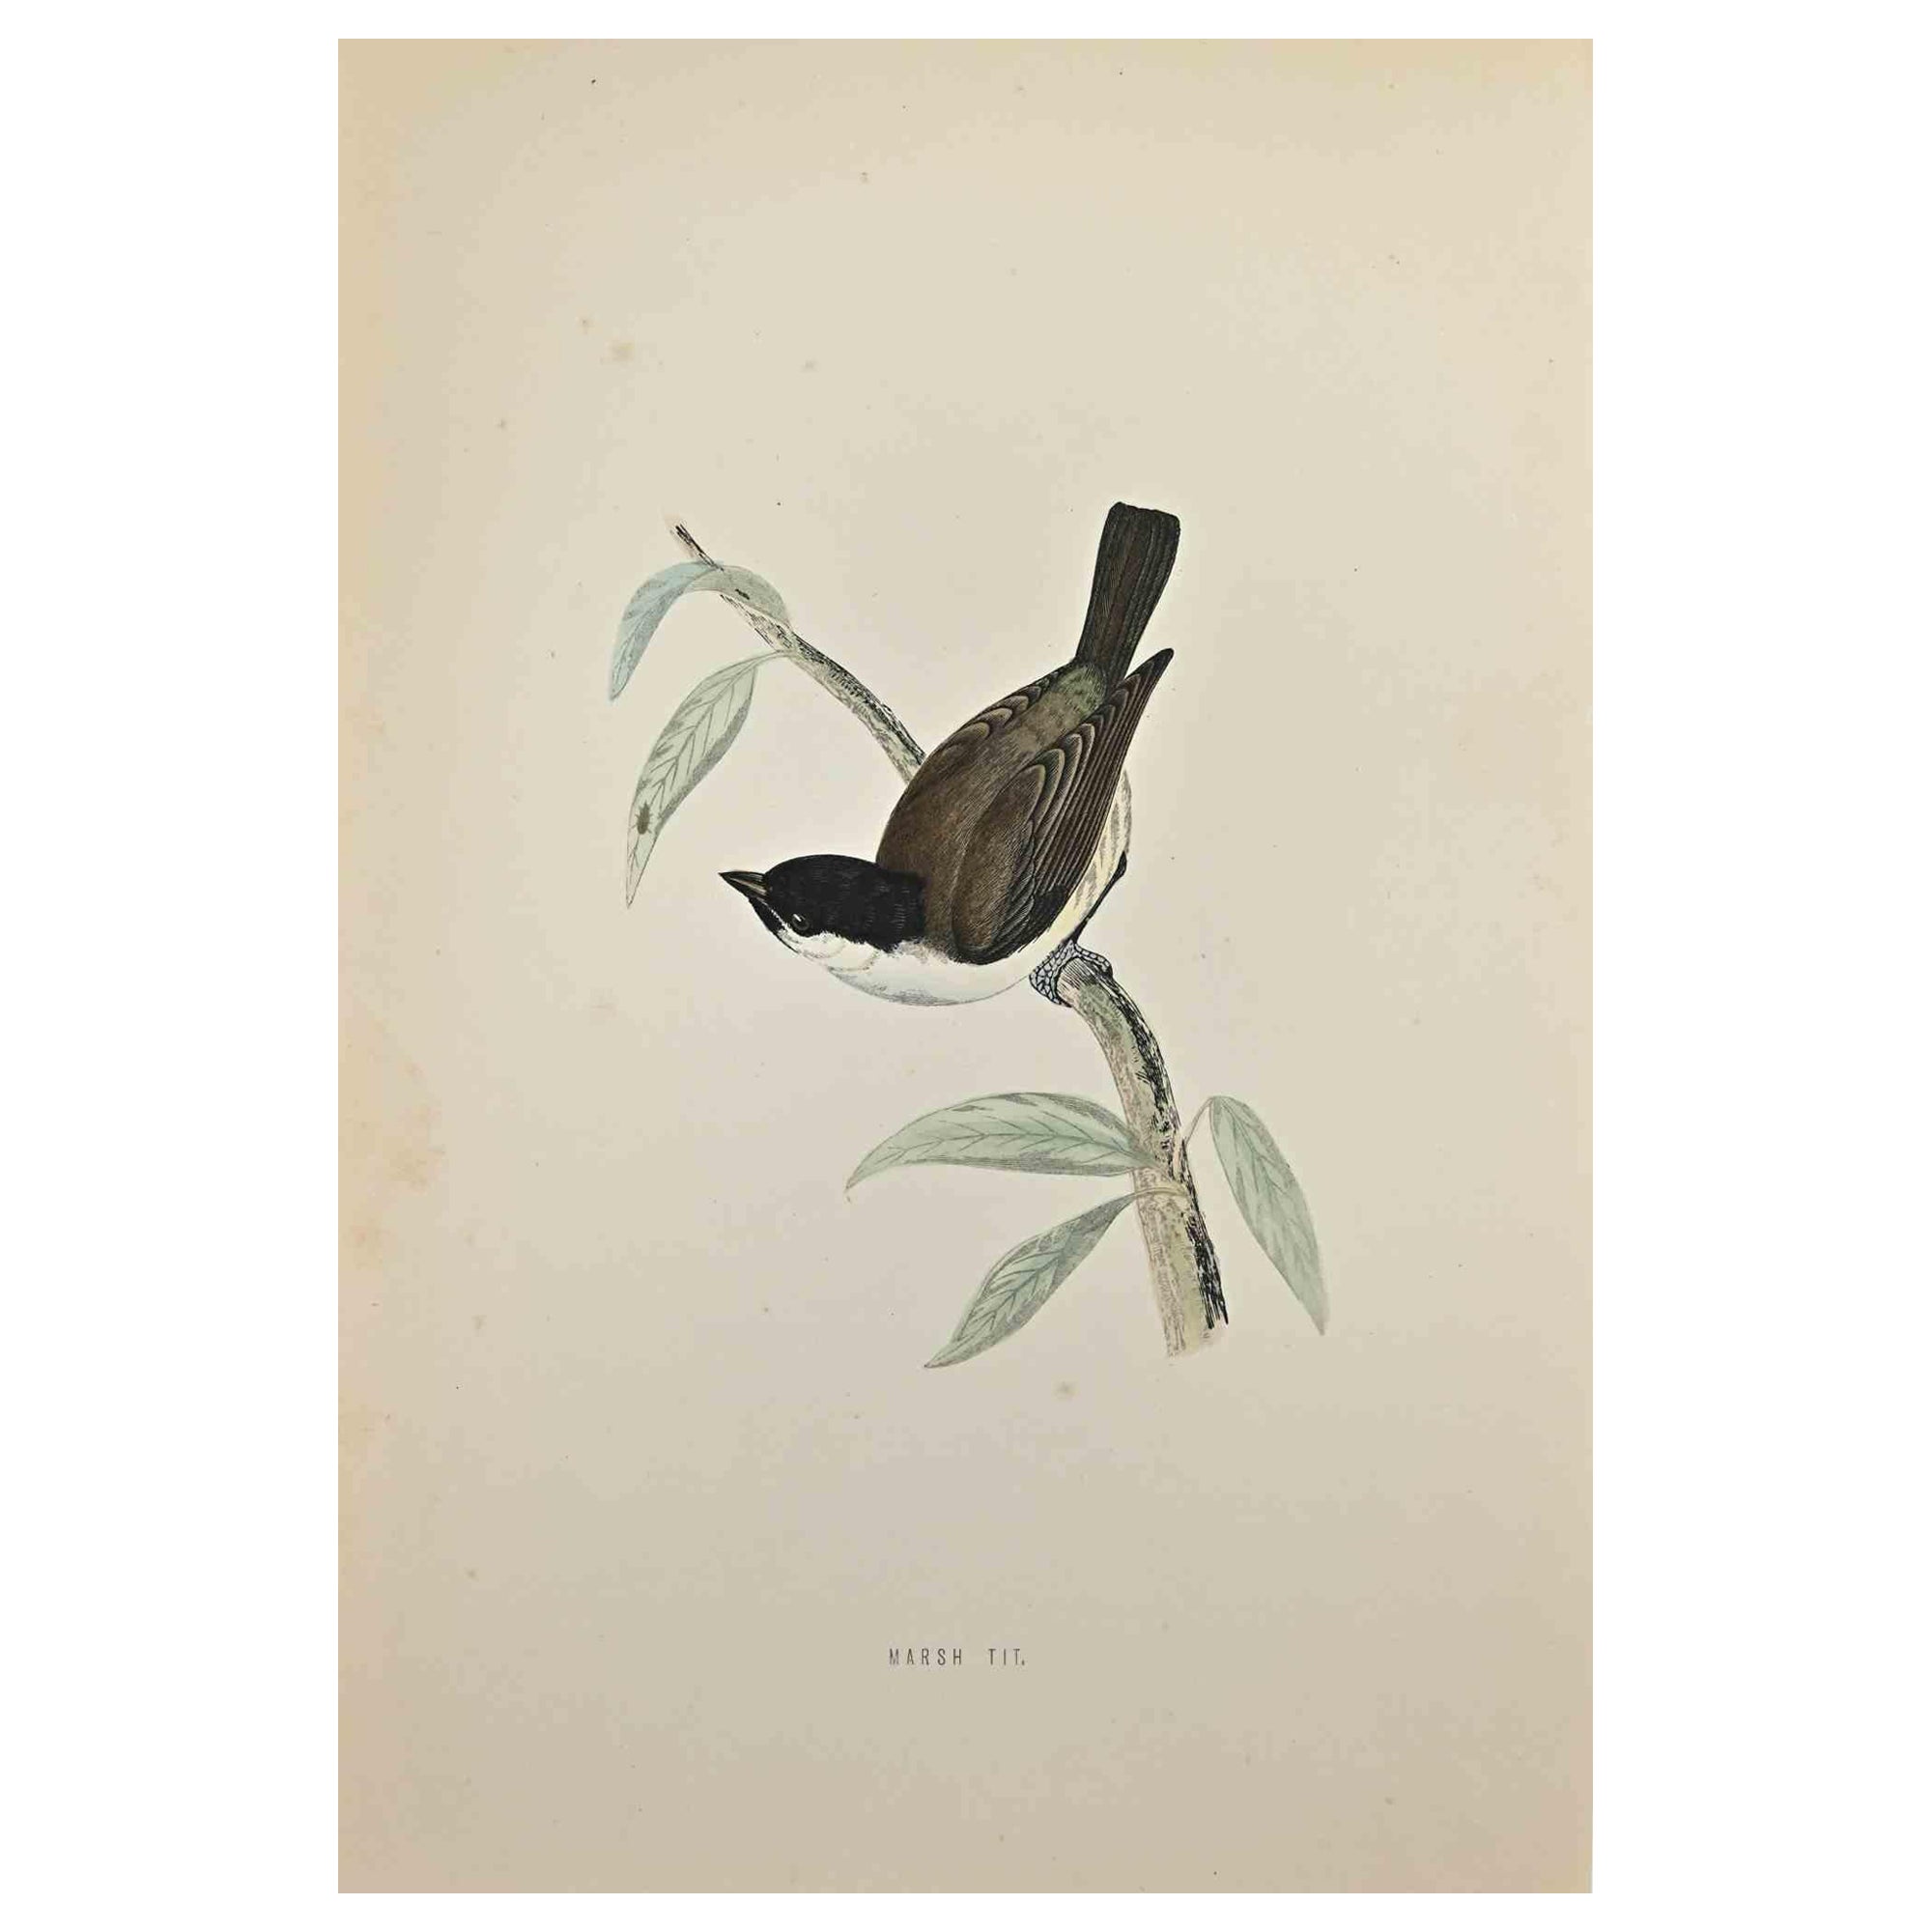 Marsh Tit is a modern artwork realized in 1870 by the British artist Alexander Francis Lydon (1836-1917) . 

Woodcut print, hand colored, published by London, Bell & Sons, 1870.  Name of the bird printed in plate. This work is part of a print suite